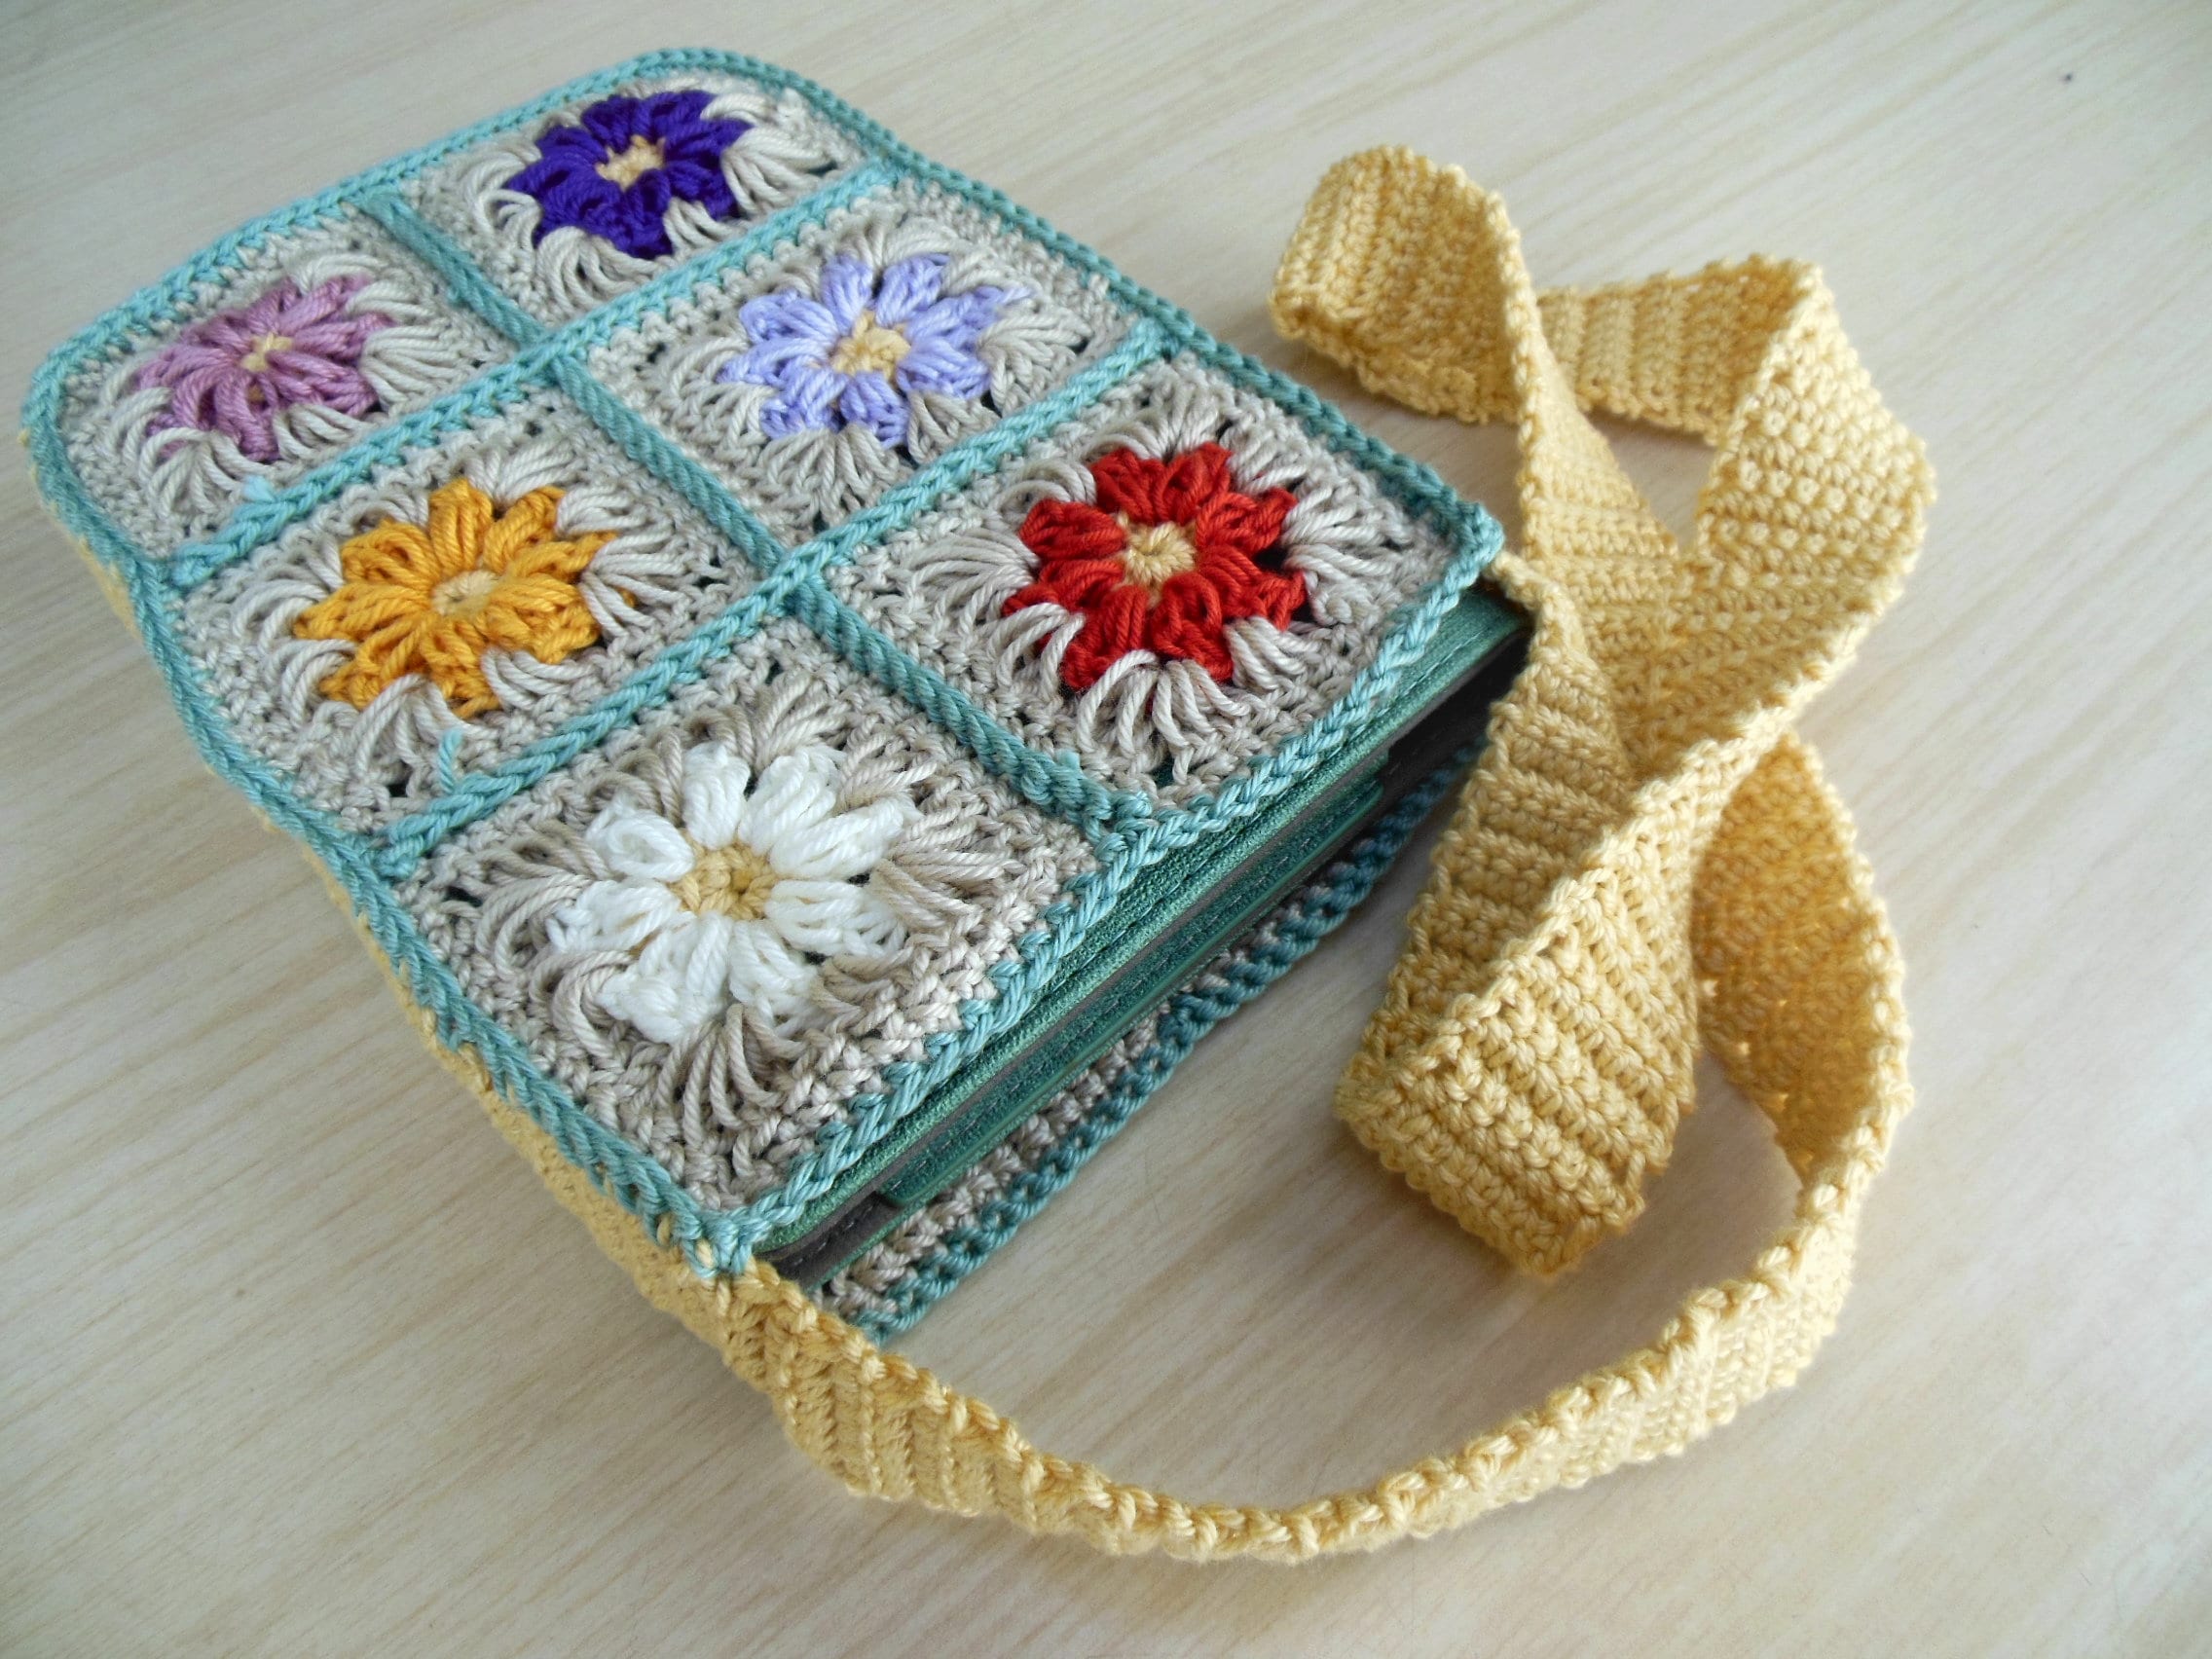 tot school tuesday) 35 handmade mother's day gifts - See Vanessa Craft